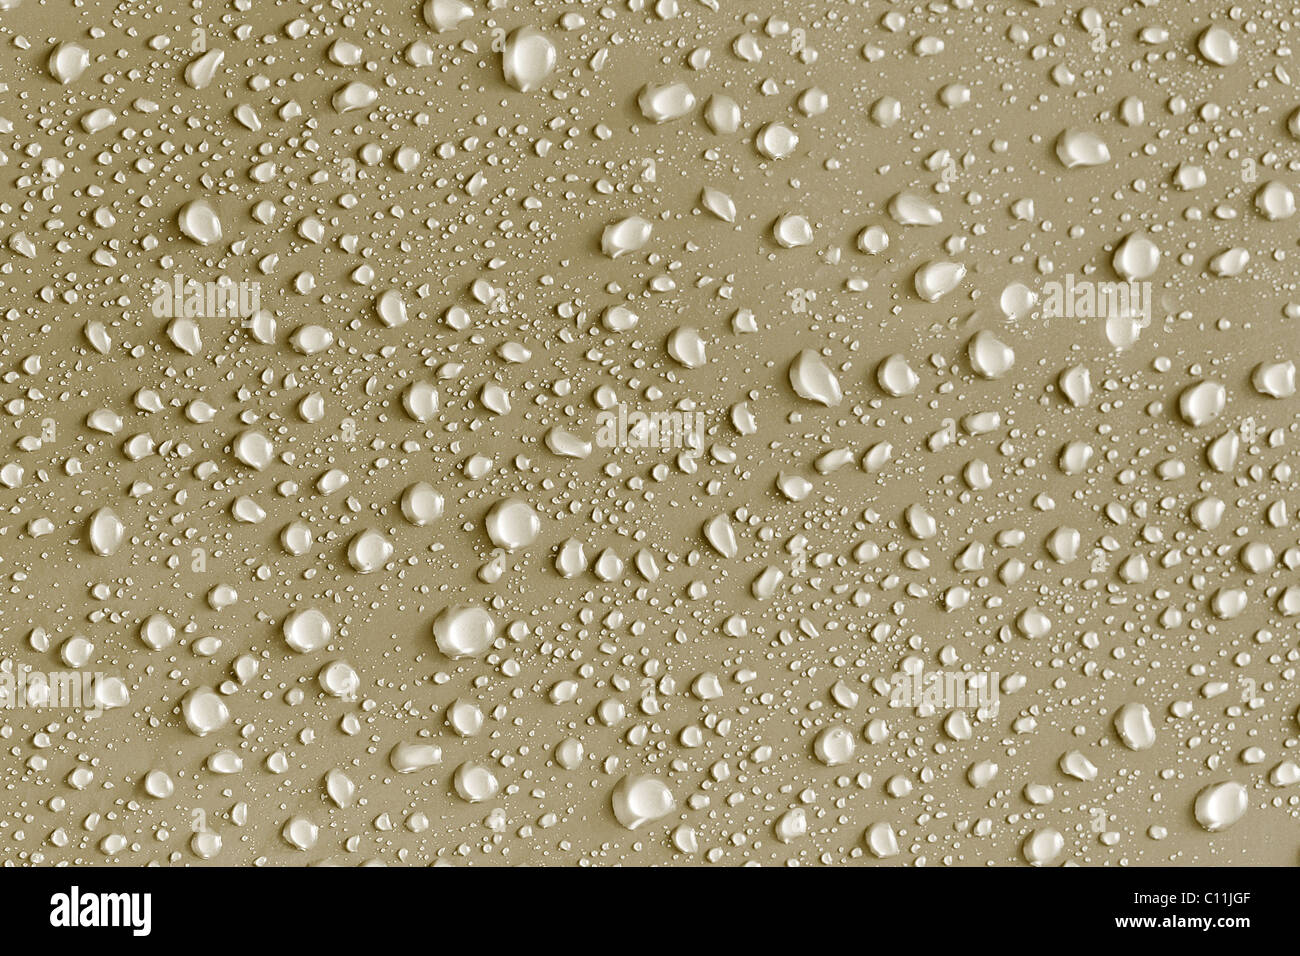 Water drops background on a gold surface Stock Photo